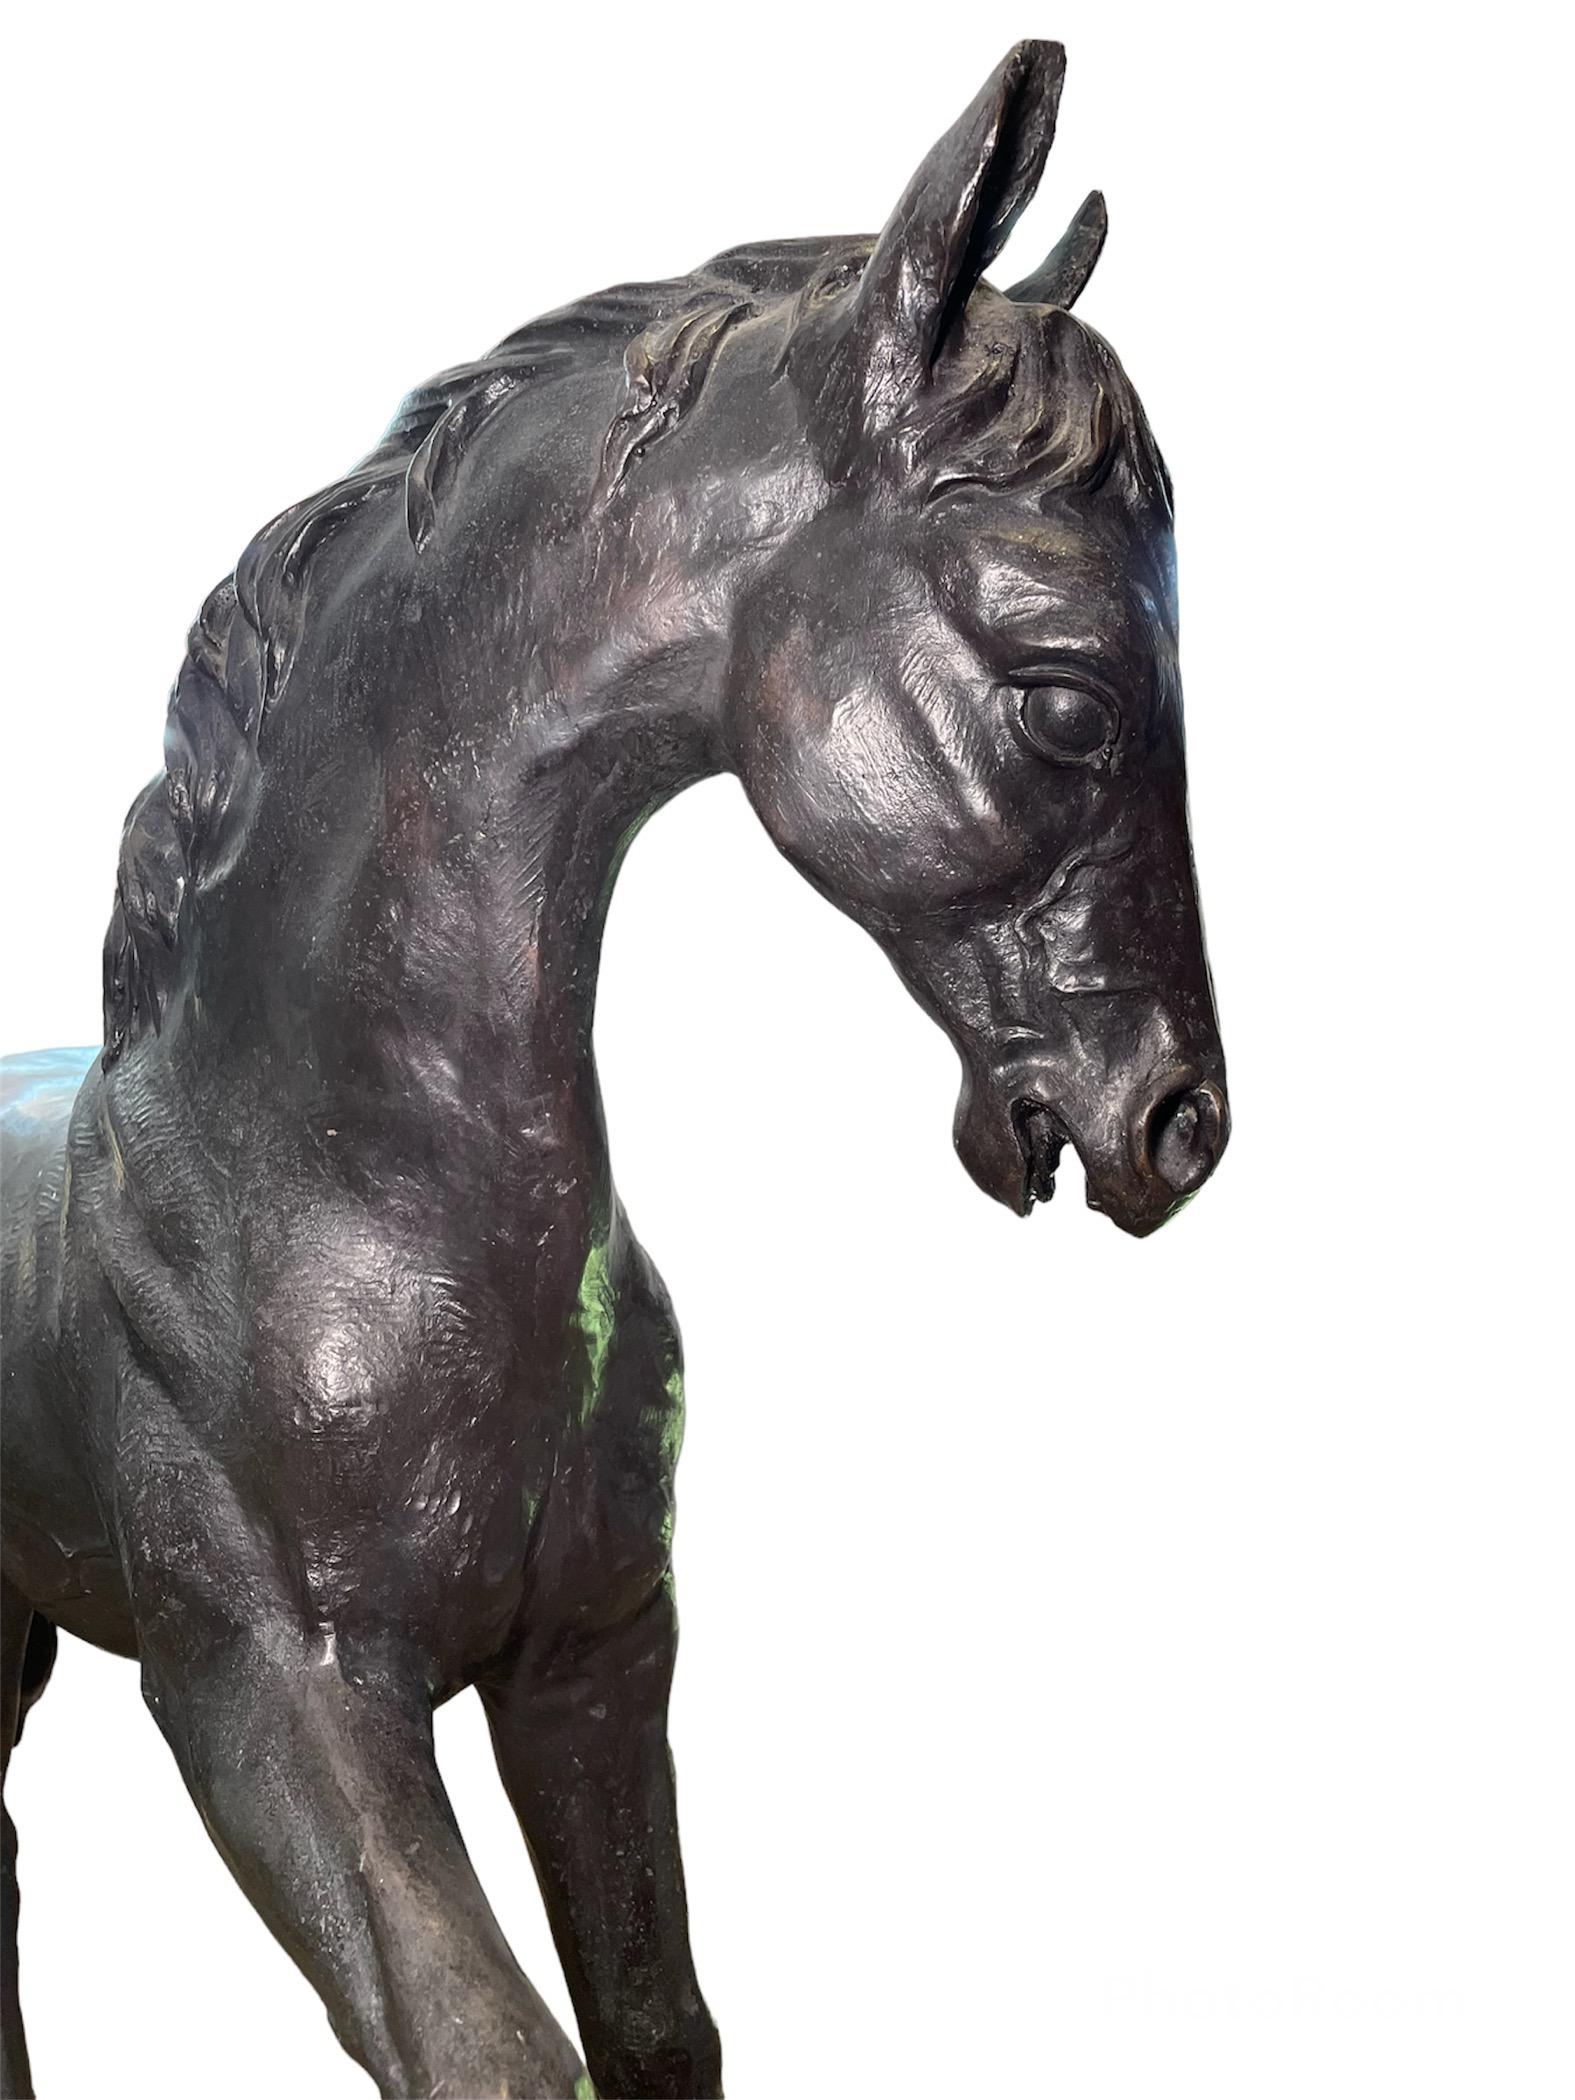 This is a large and heavy patinated bronze sculpture/statue of a horse. It is an almost life size pony that is playfully trotting. The pony sculpture is full of details from head (mane, eyes, nostrils), muscles and bones to hooves.